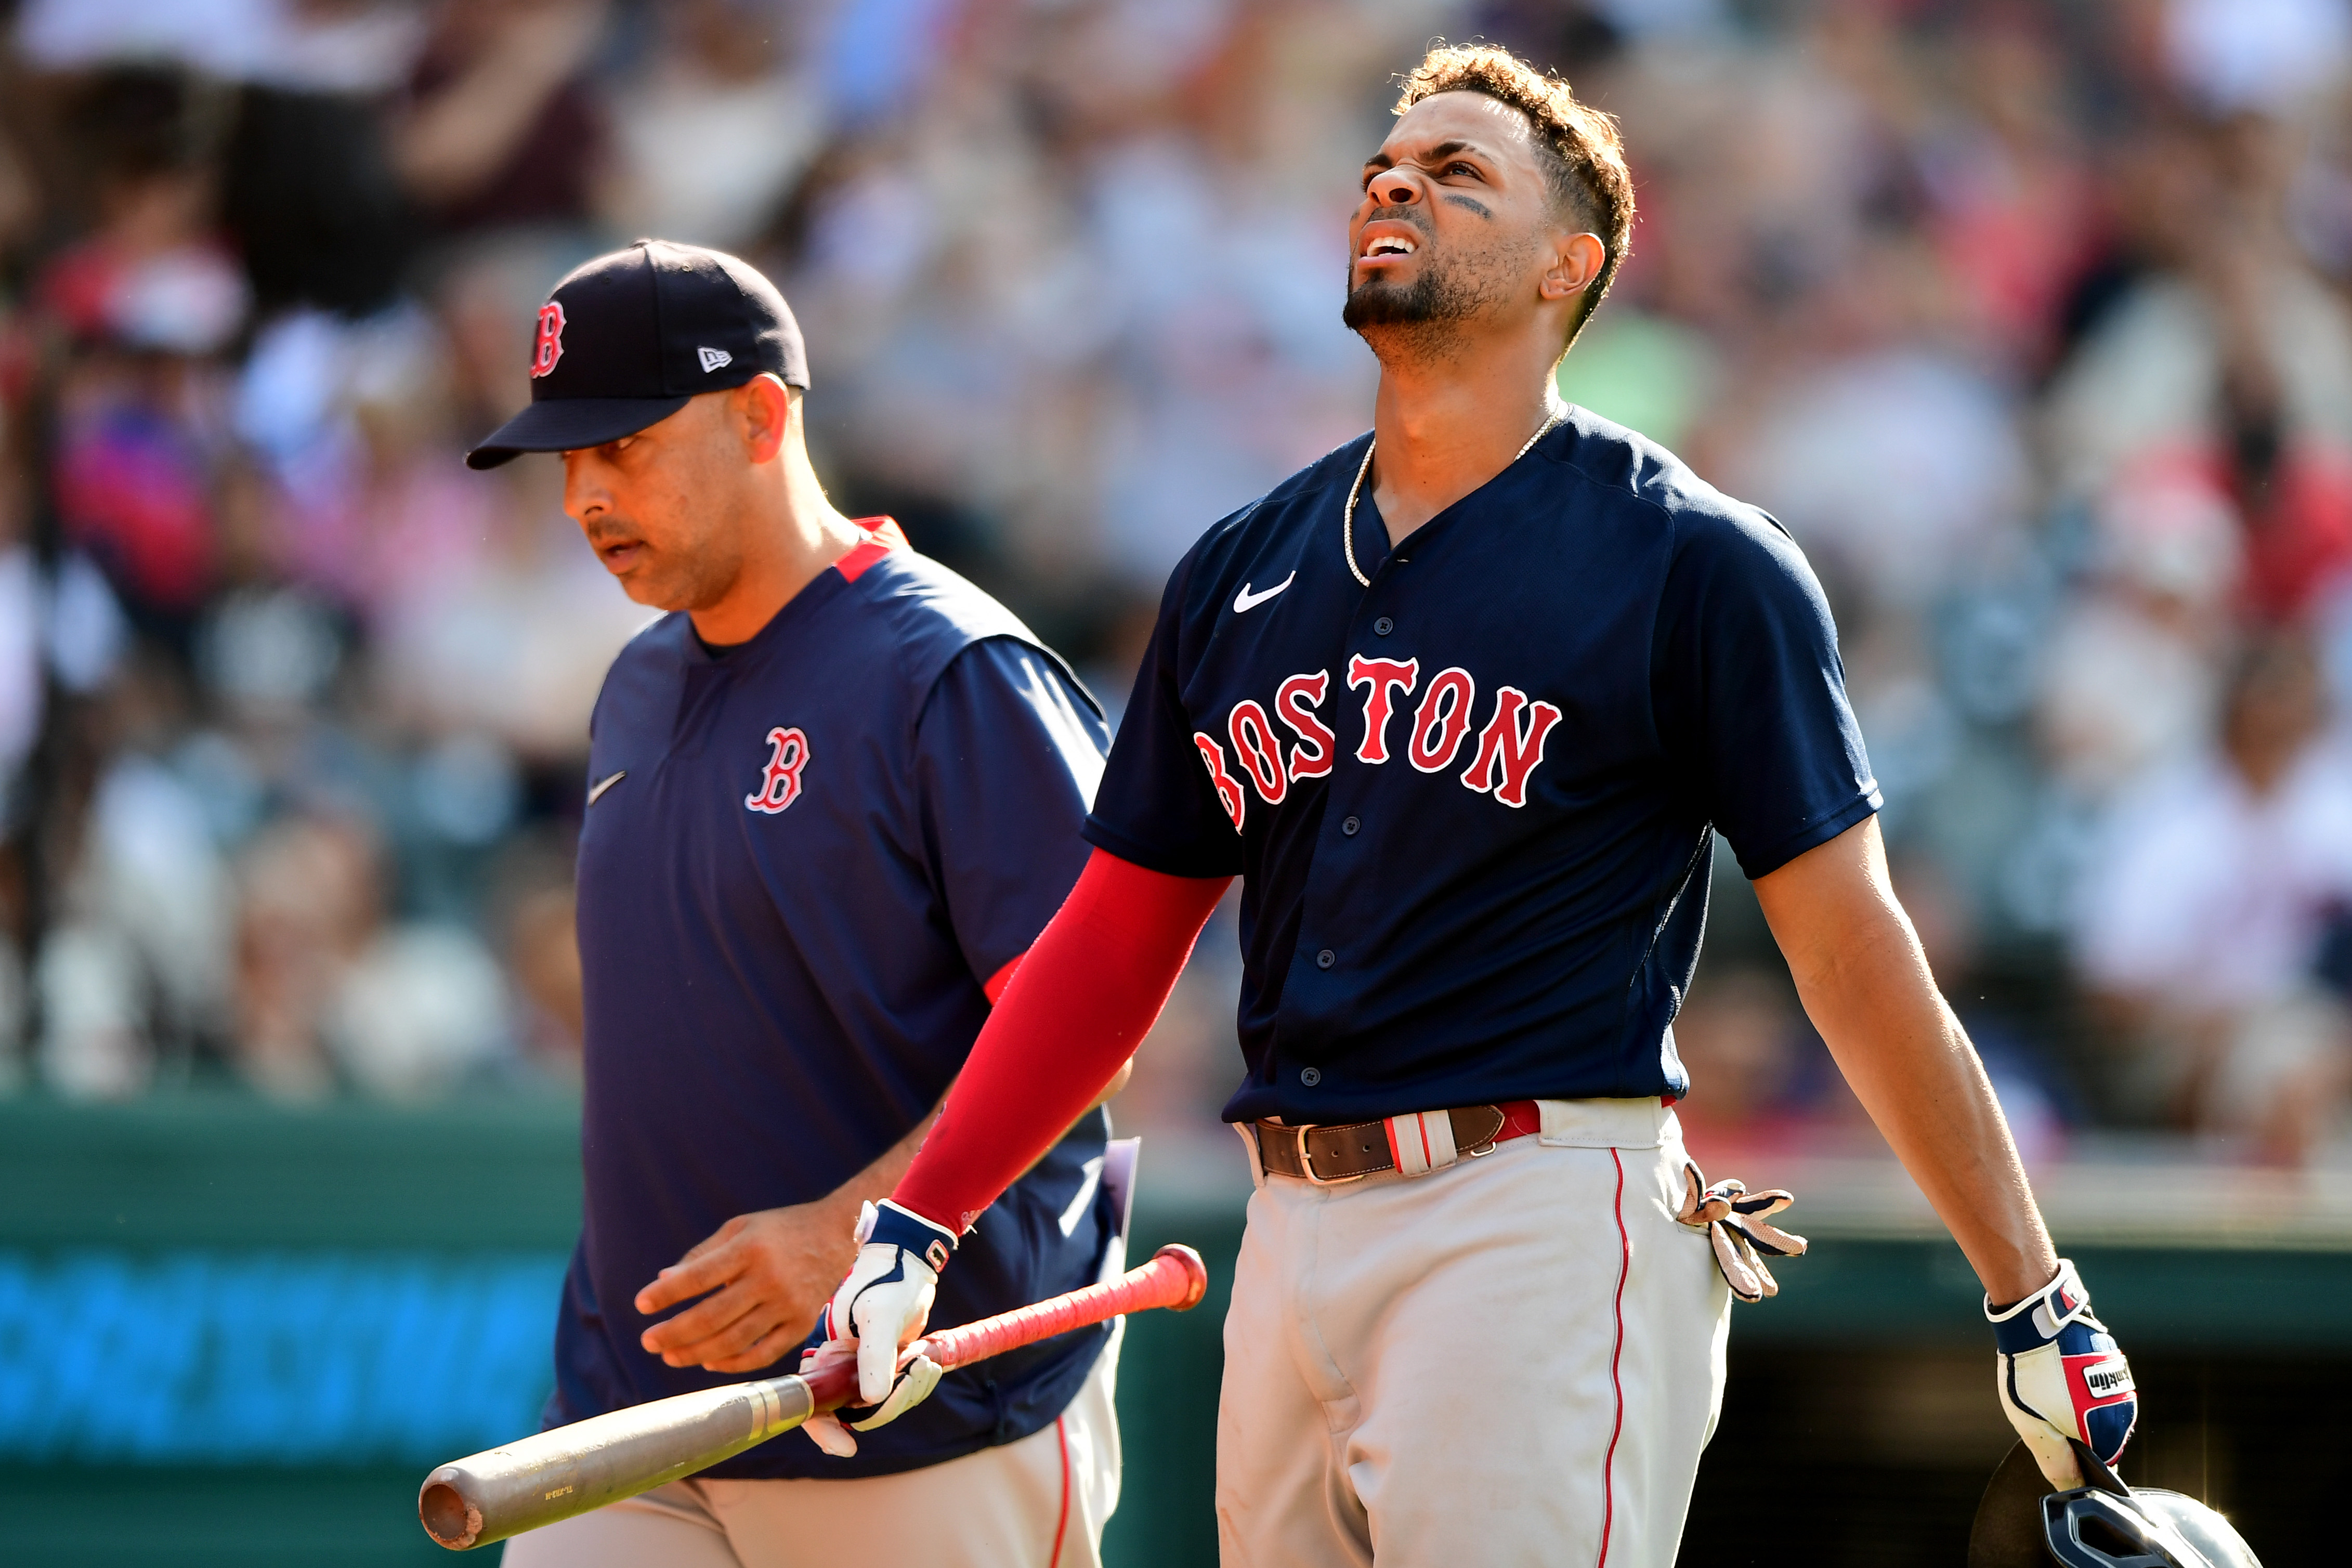 Red Sox COVID-19 outbreak spreads to manager Alex Cora